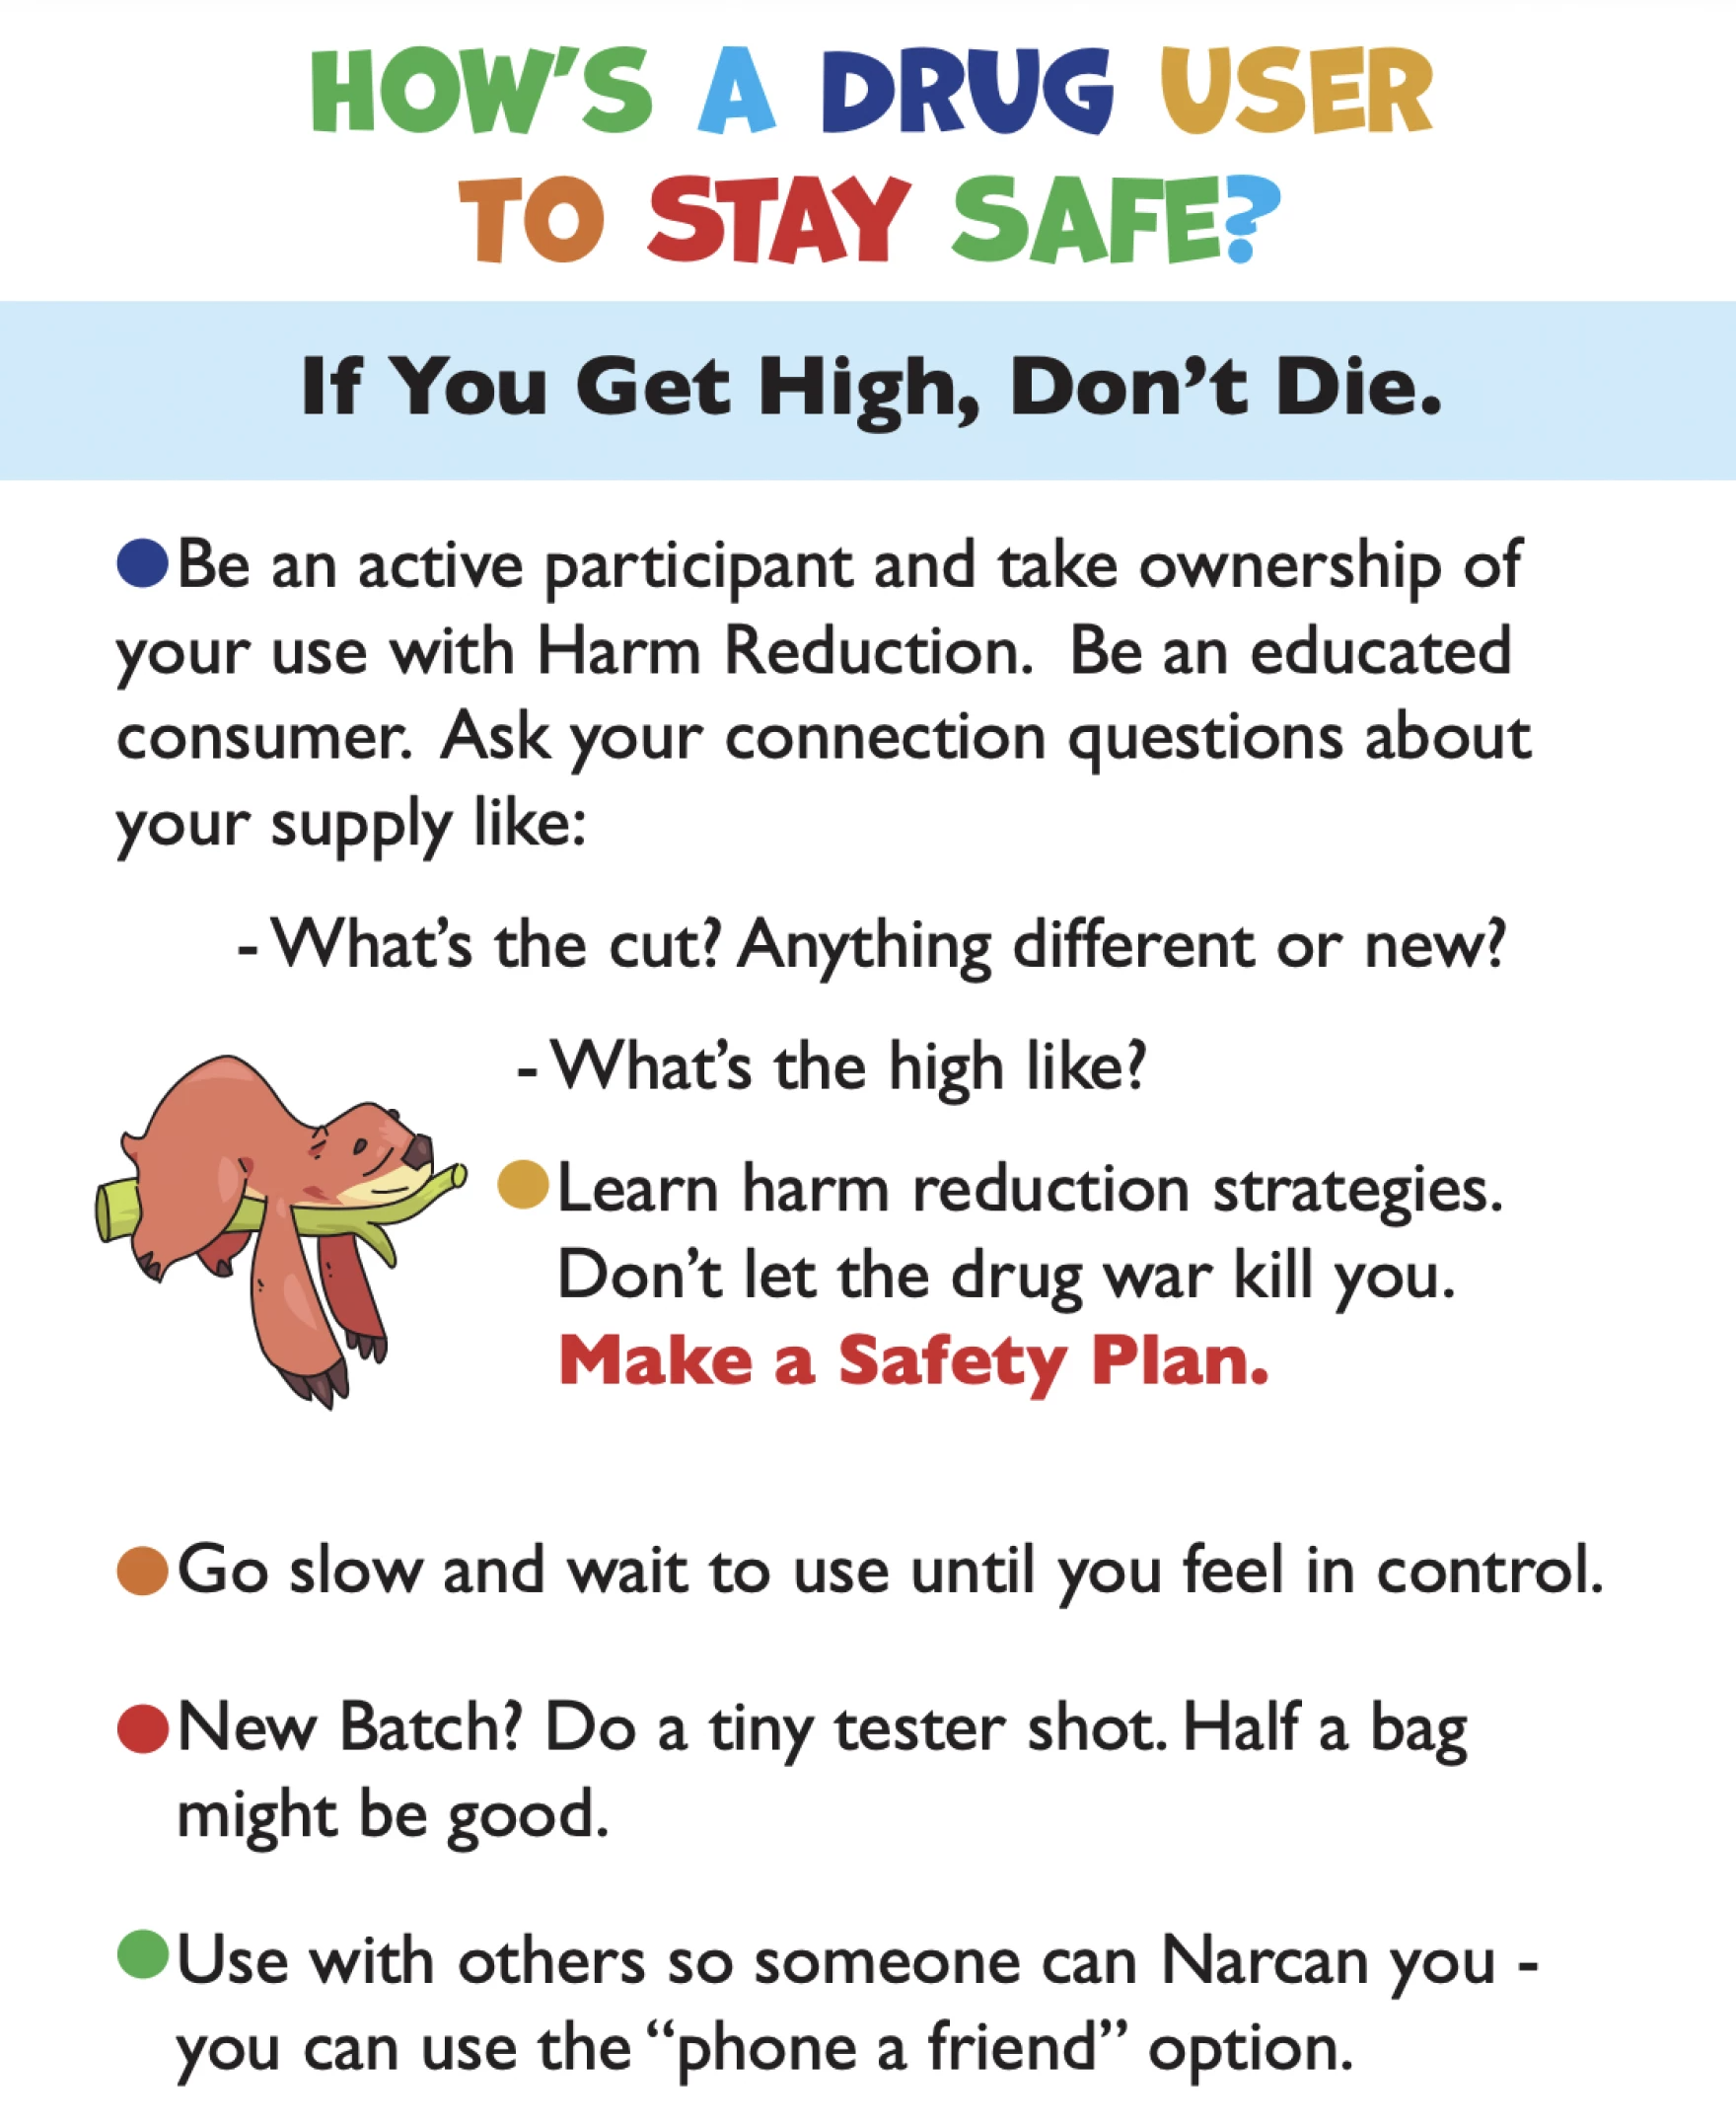 Ryan Fowler, HIV/HCV Resource Centerproduced a flier to warn people about xylazine and offer safety tips. 